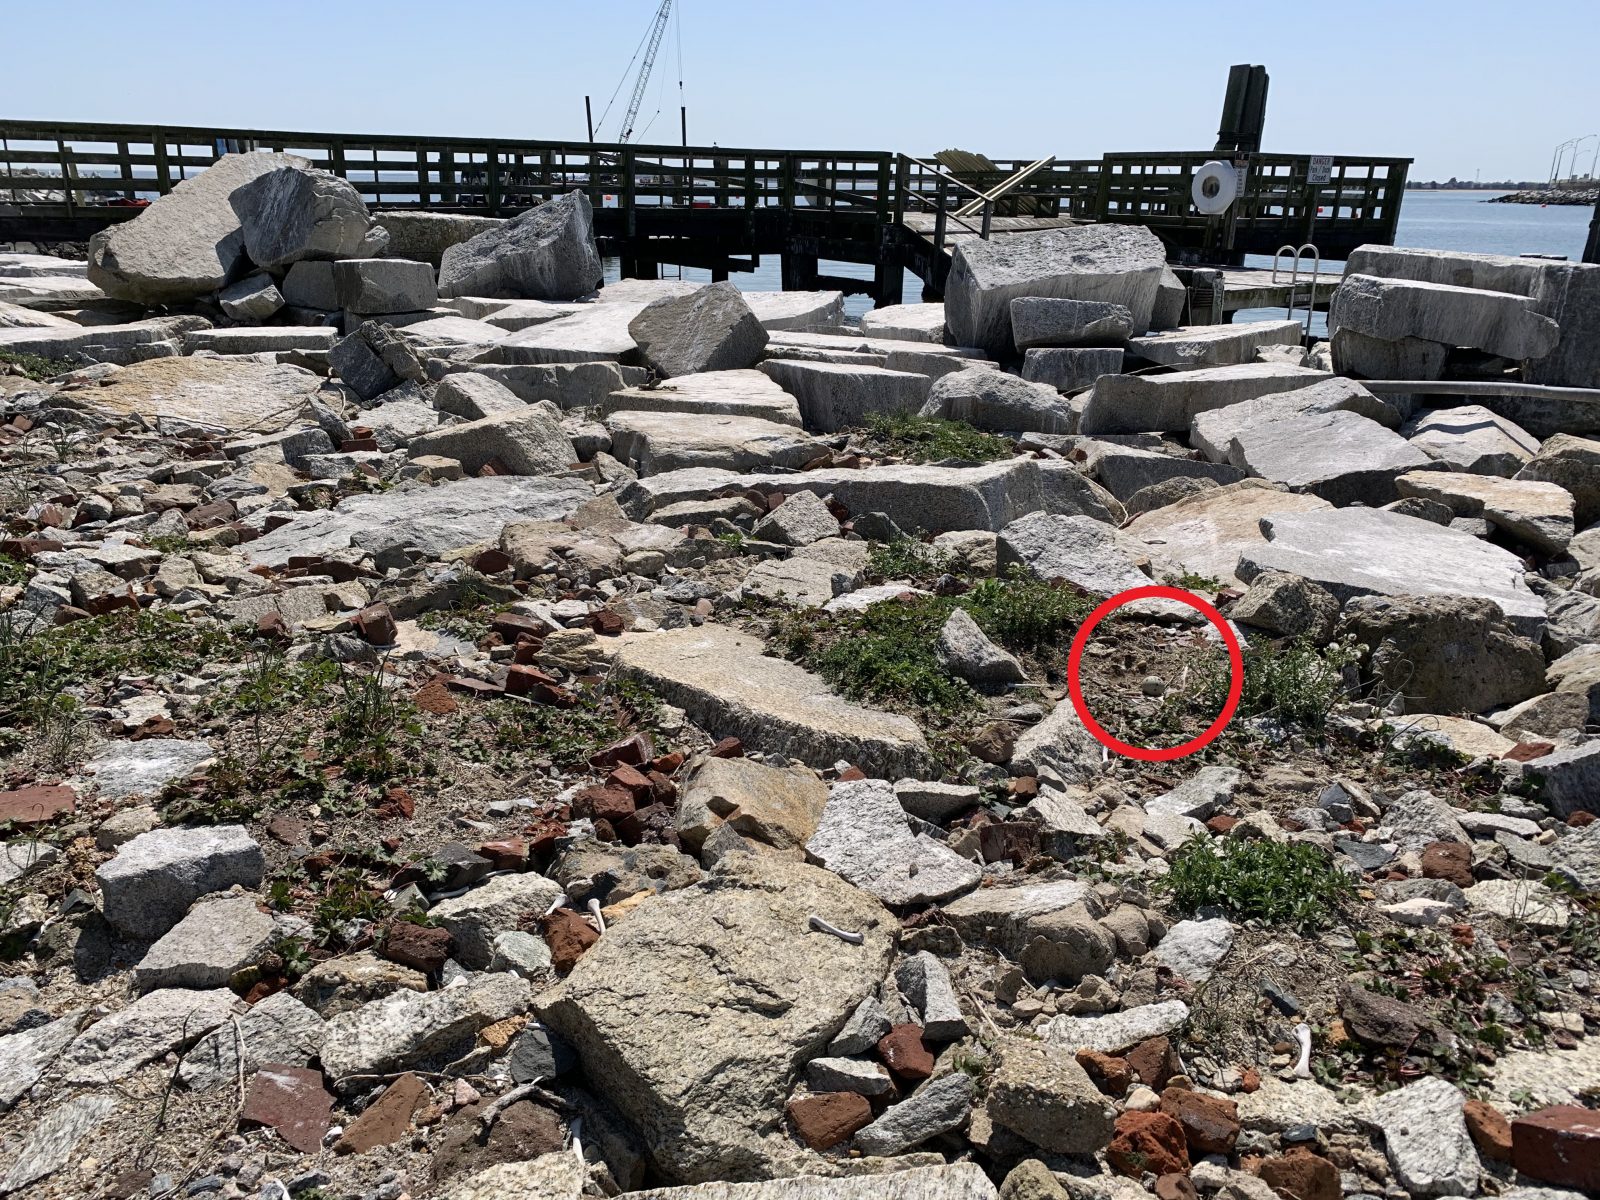 A red circle around the previous image to highlight a shorebird nest in the scattered stones